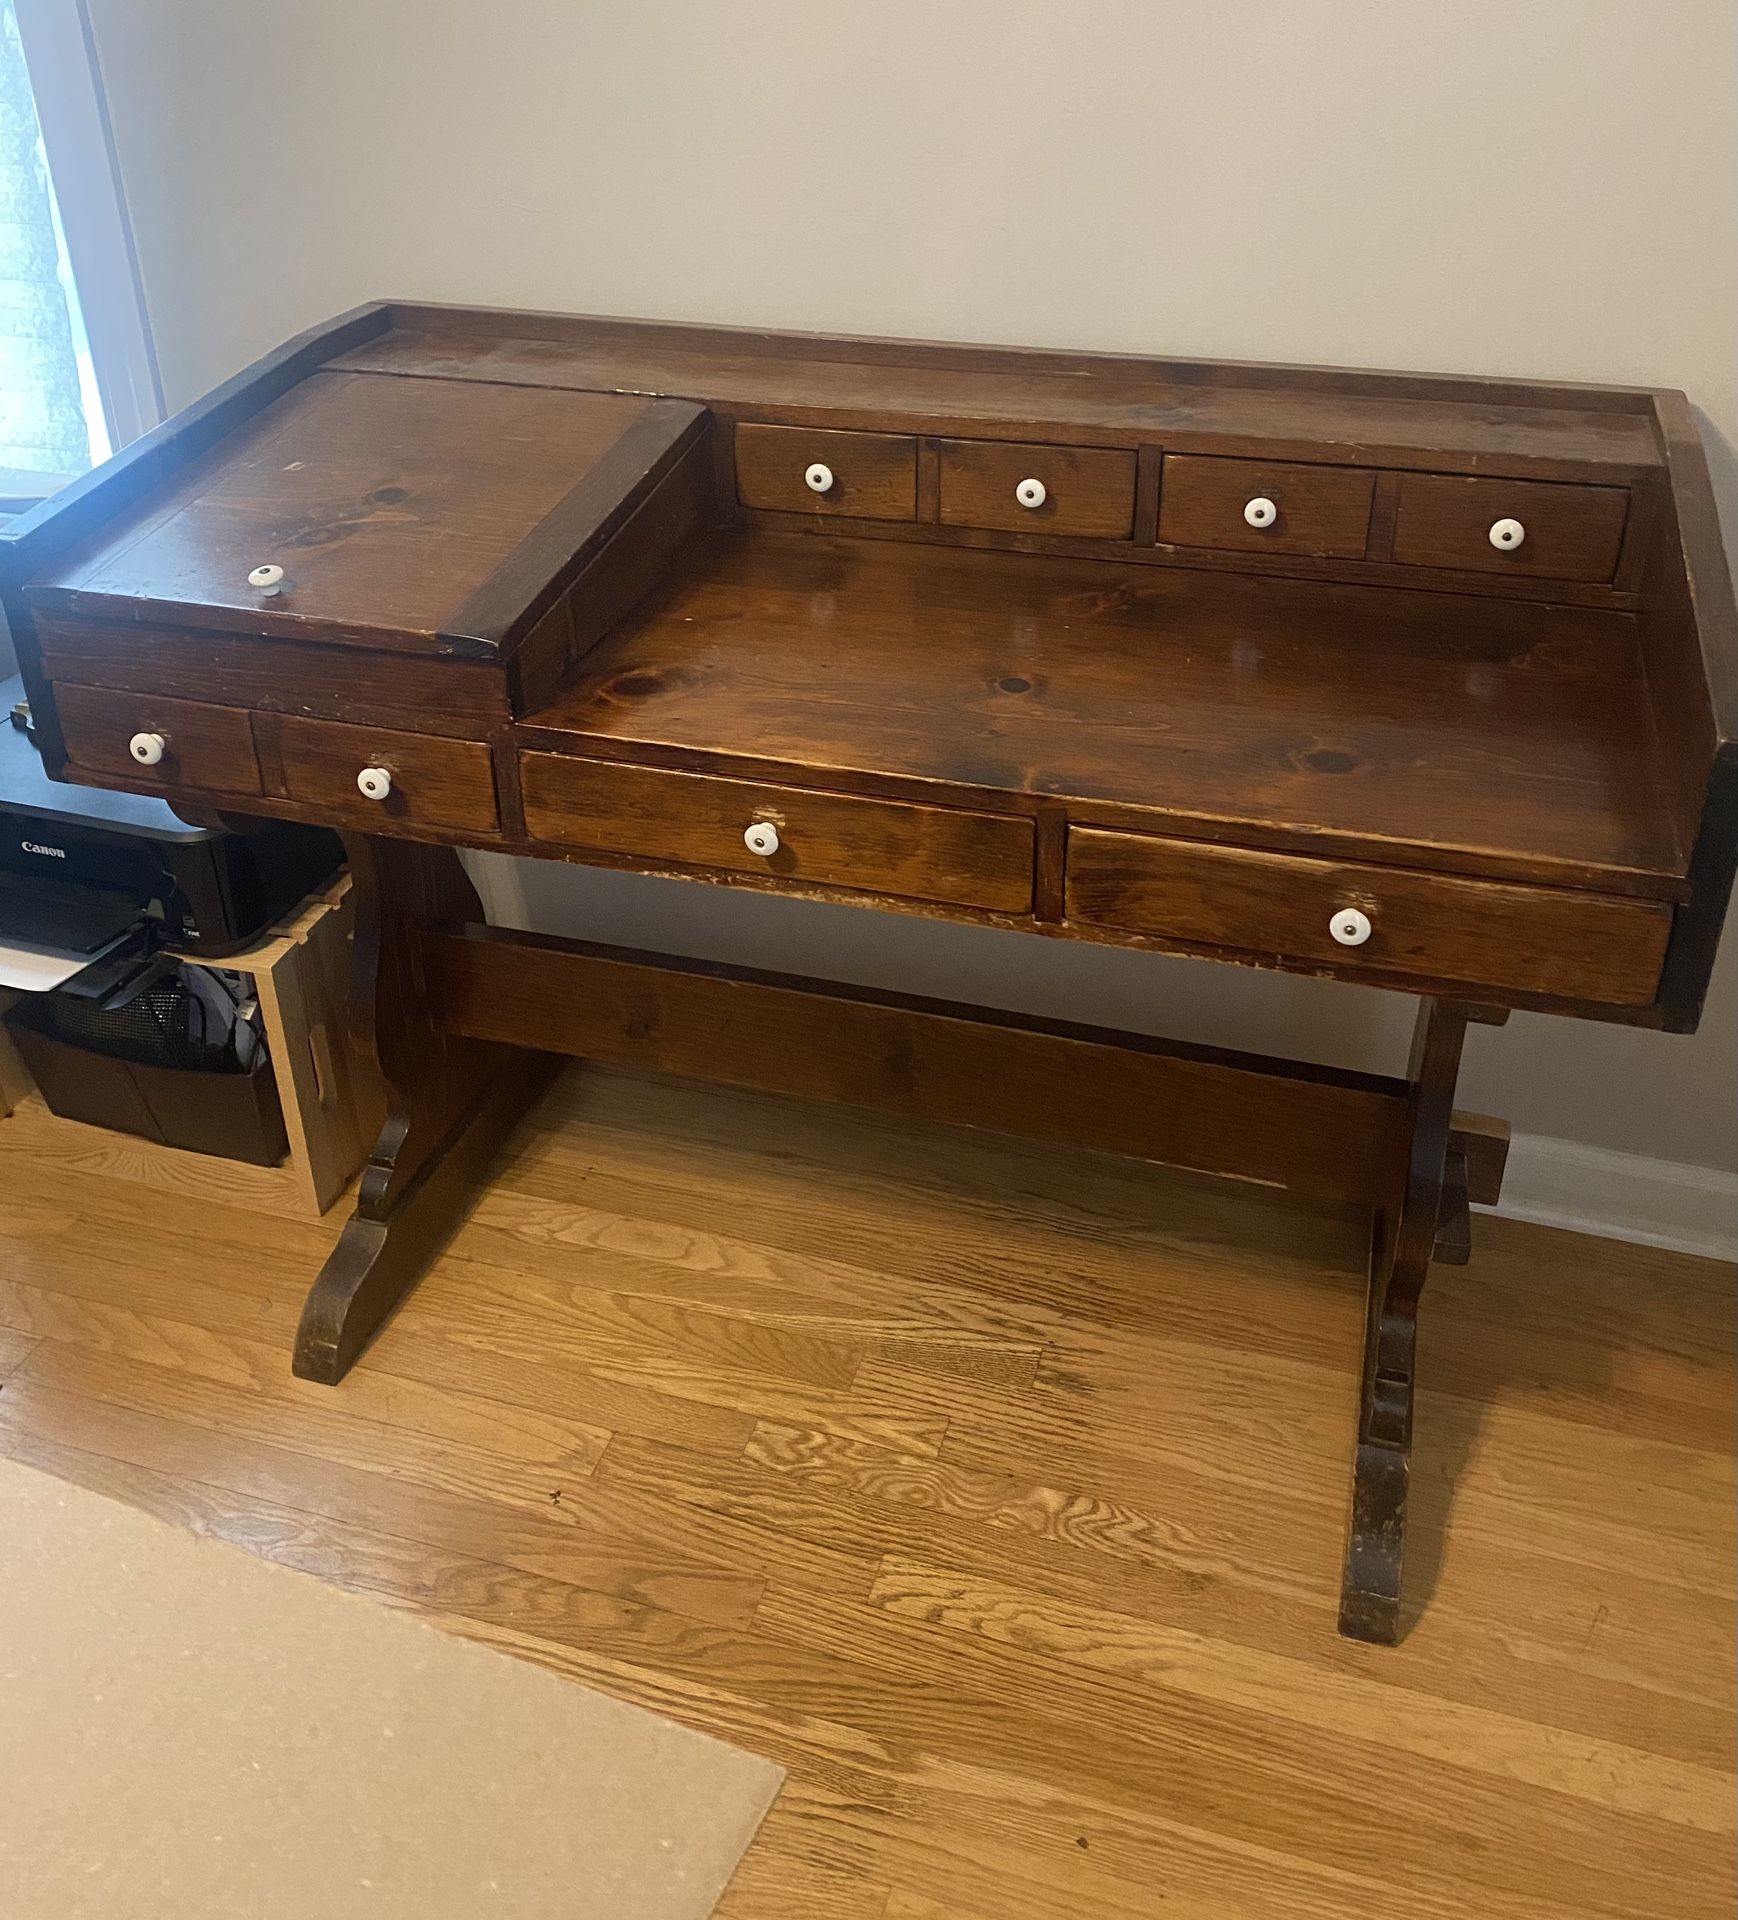 Antique Desk With Lots Of Storage!